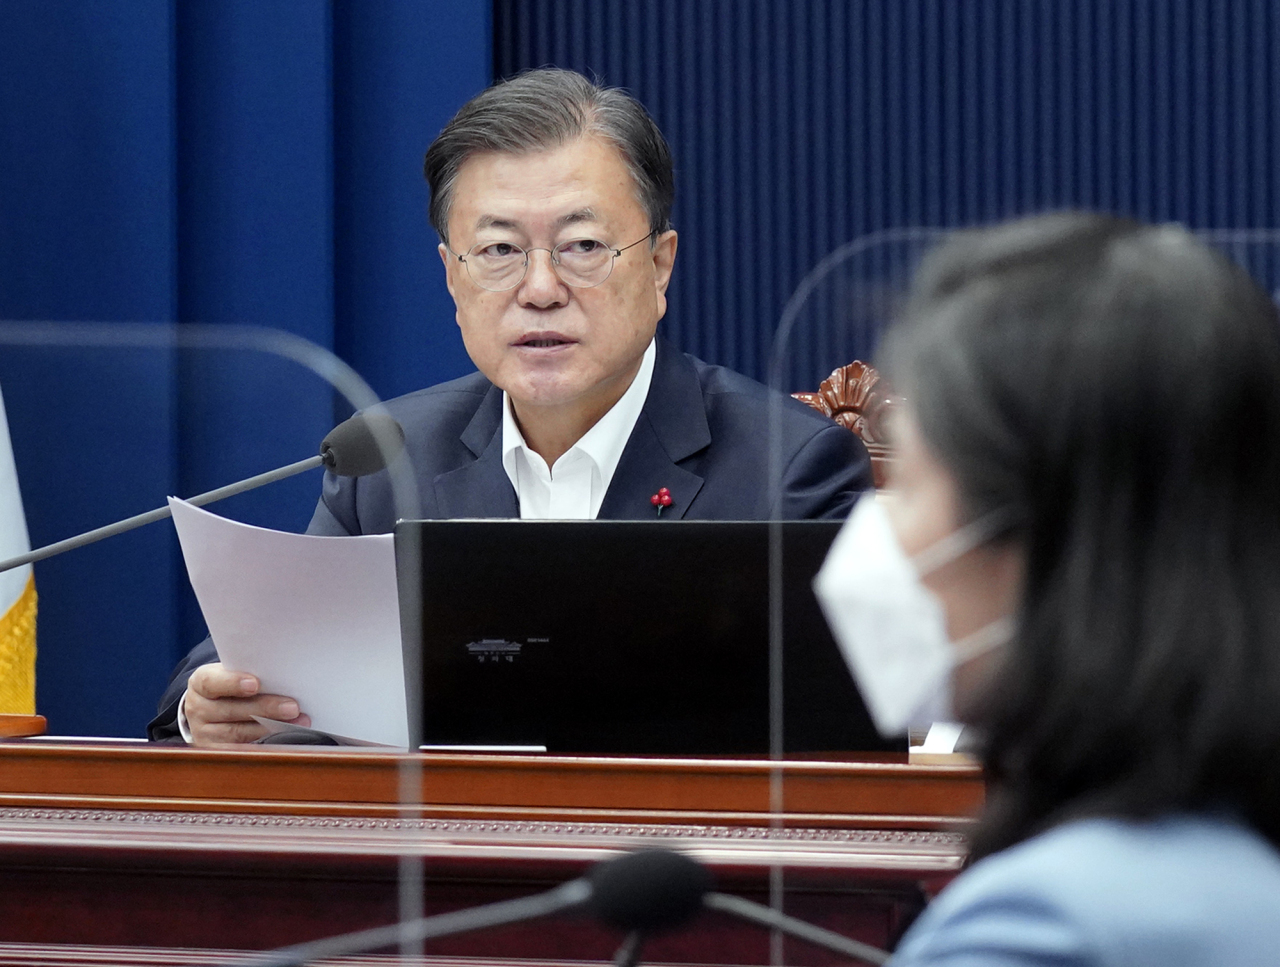 President Moon Jae-in speaks during a Cabinet meeting at Cheong Wa Dae in Seoul on Tuesday. (Yonhap)